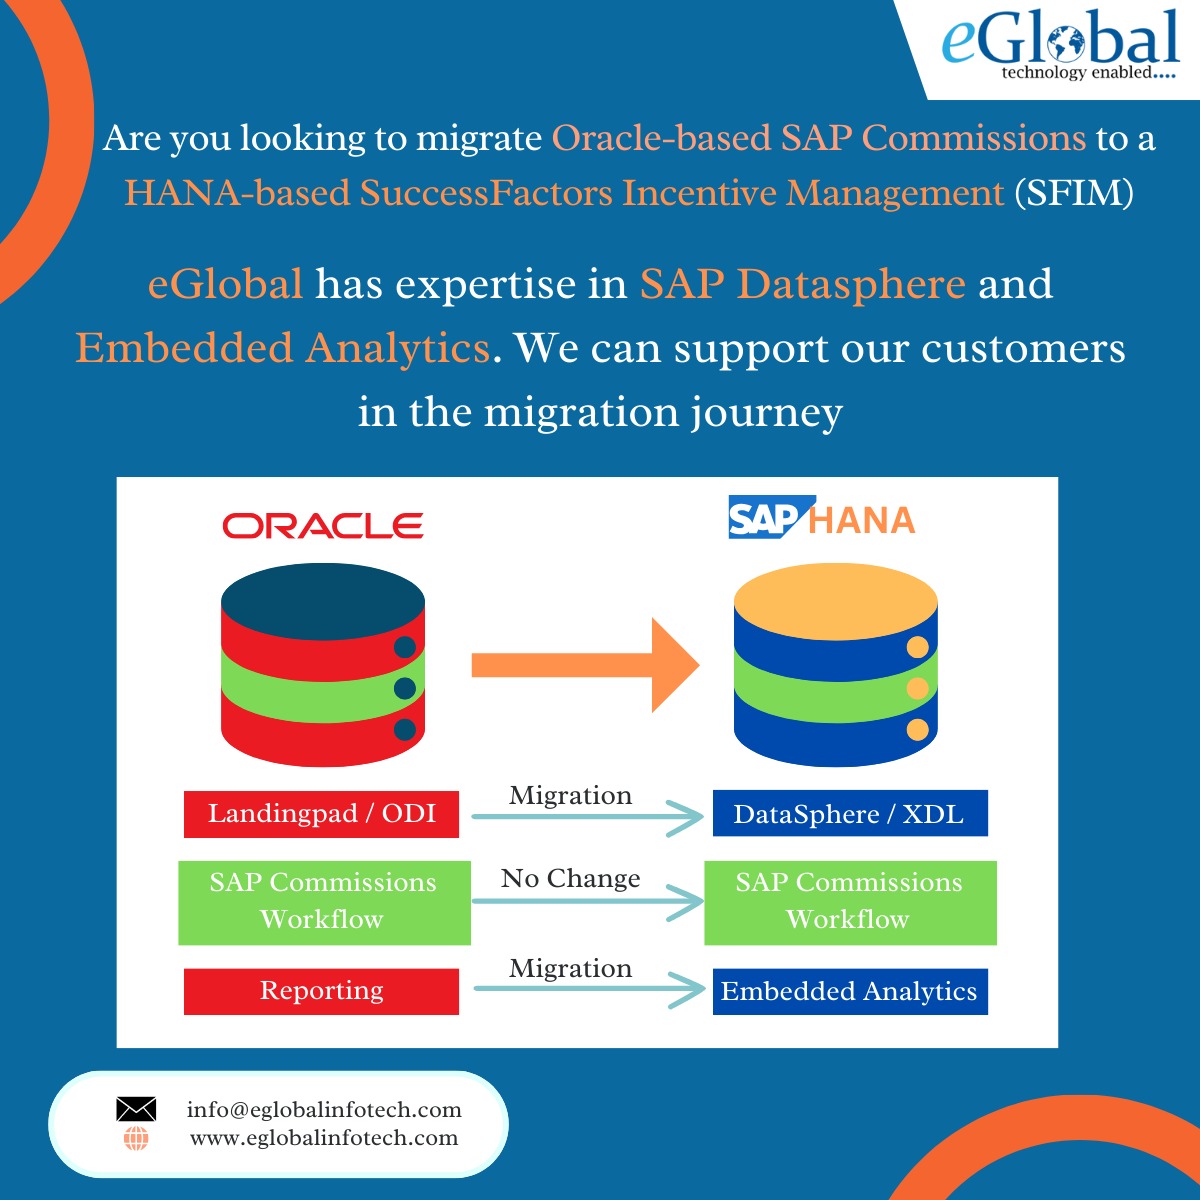 At eGlobal, we have a team of expert consultants who specialize in:

1.Oracle and HANA
2.Informatica and DataSphere
3.Crystal Reports and Embedded Analytics

We can guide you through end-to-end migration from Oracle to HANA

#SAPCommissions #SFIMMigration